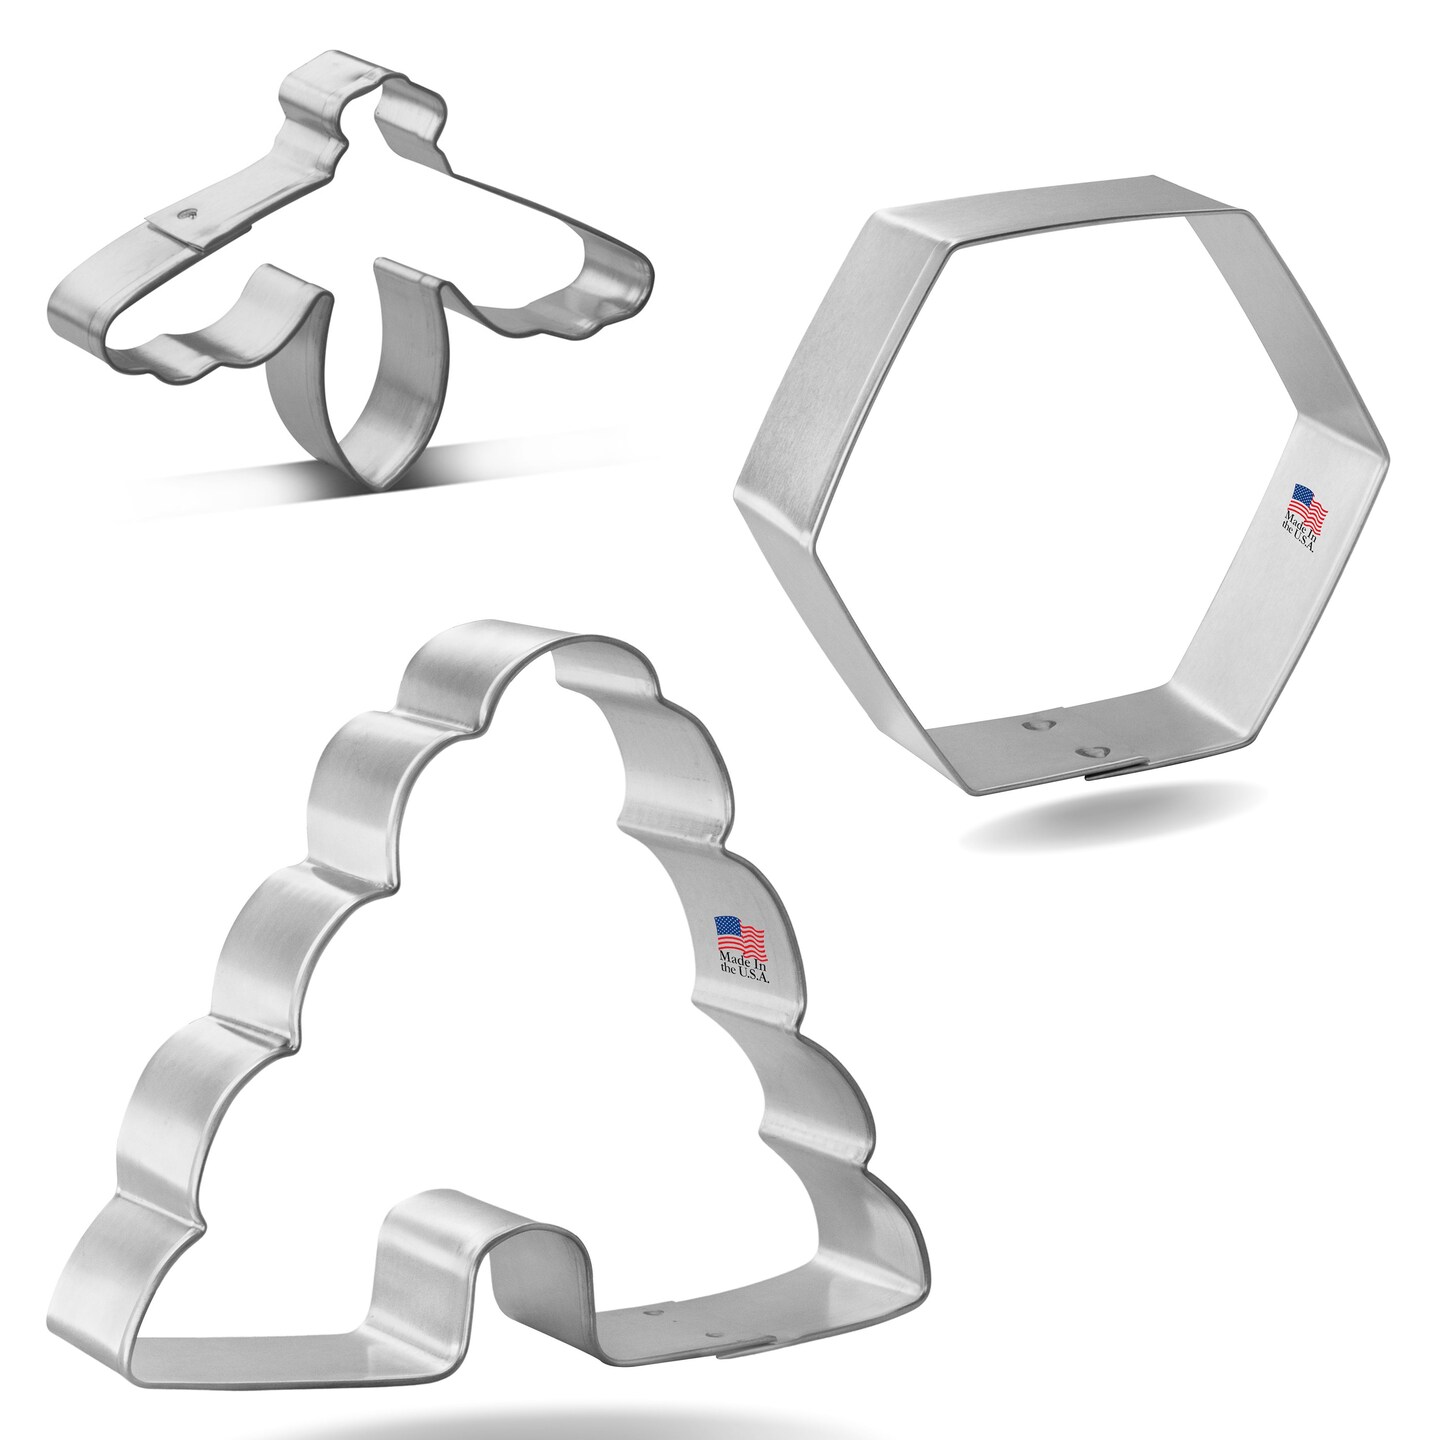 CookieCutter.com 3 Piece Summer Bee Hive Cookie Cutter Set Bee Hive, Mini Bumble Bee, Honey Comb Hexagon, Metal Shapes Made in USA, Silver